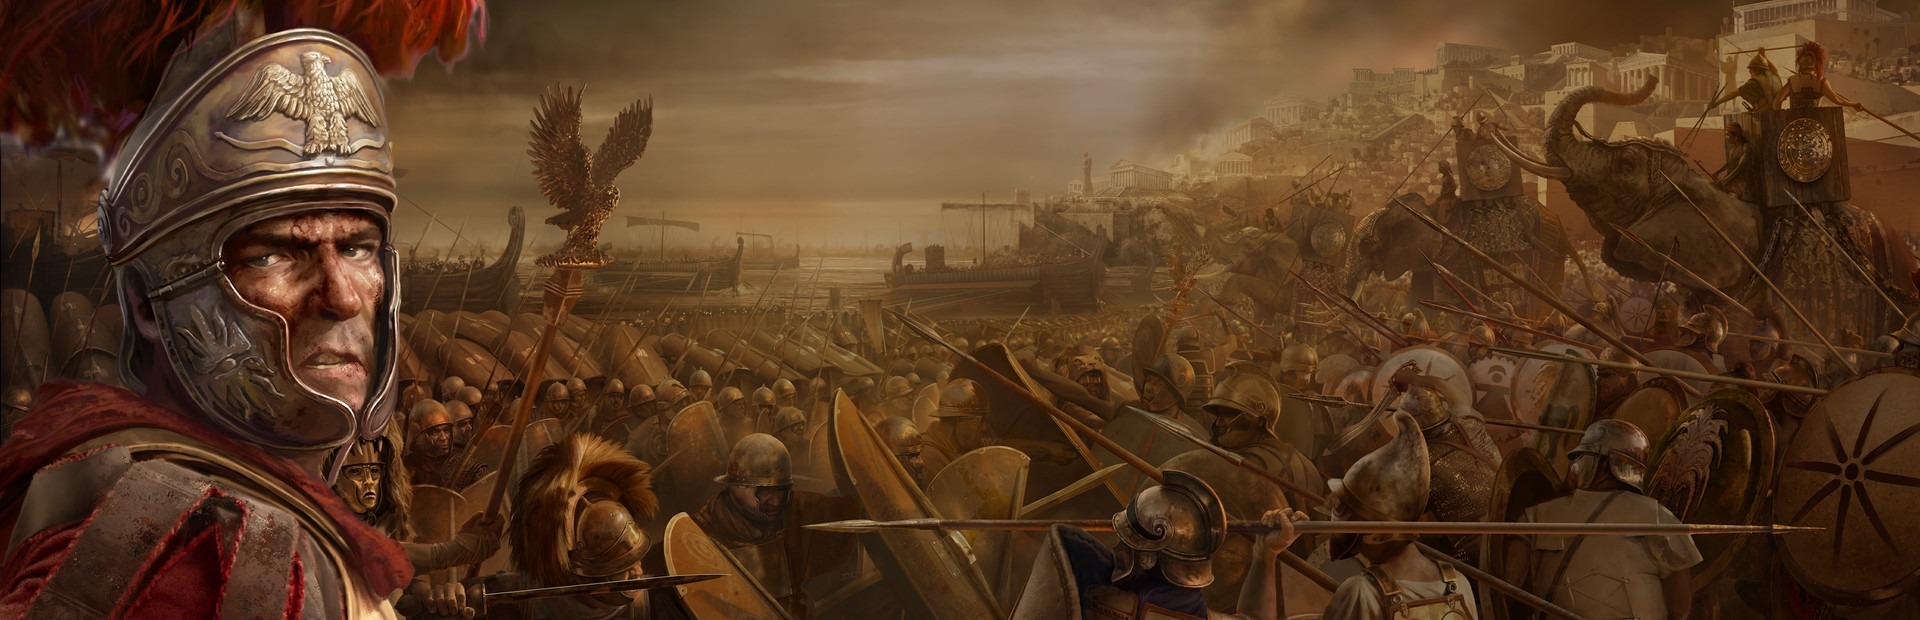 Banner Total War: ROME II - Pirates and Raiders Culture Pack